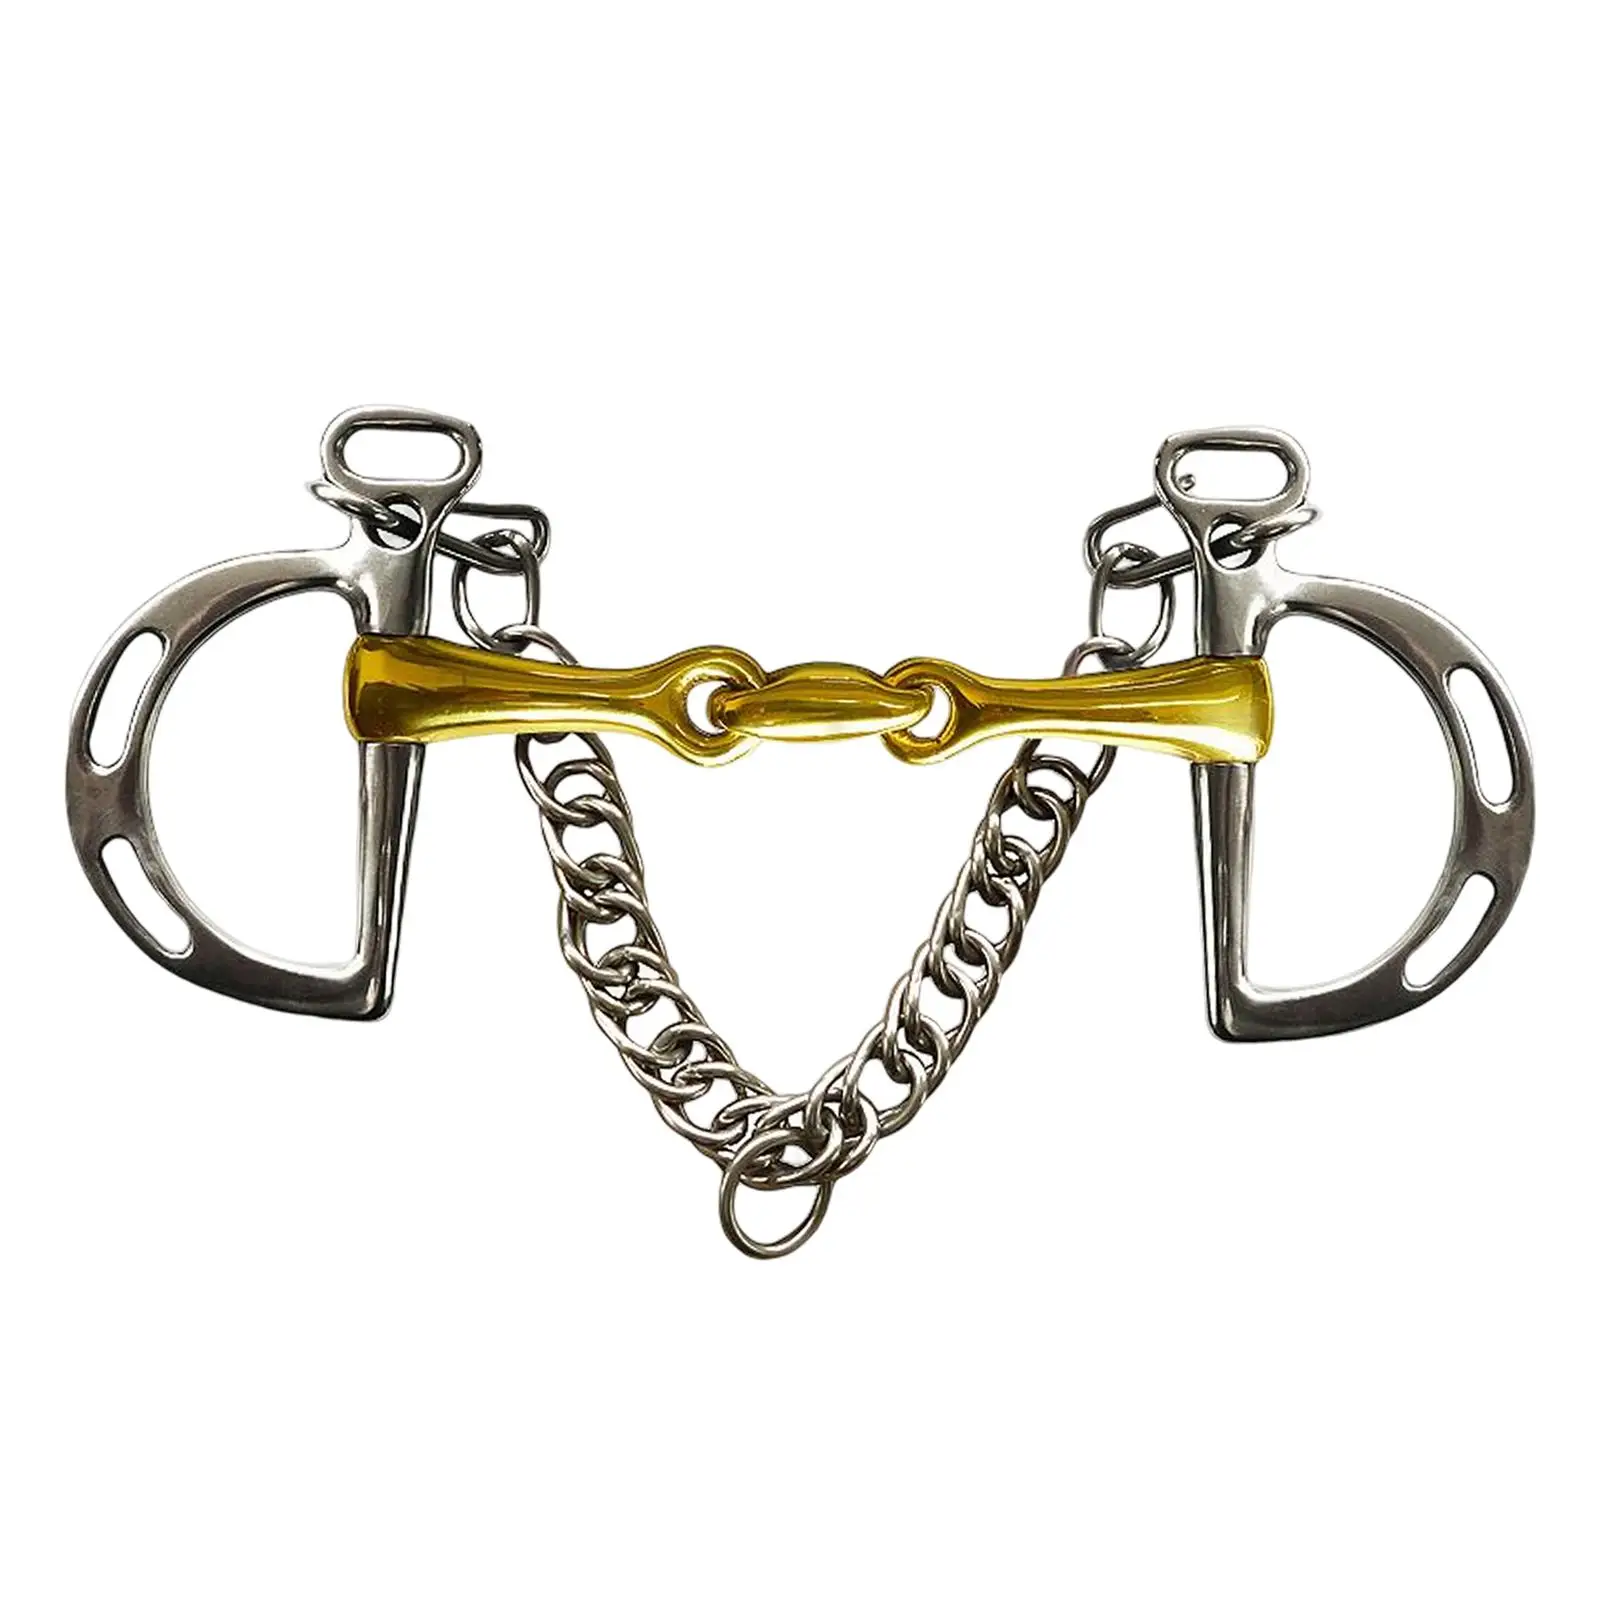 Horse Bit Copper Mouth Stainless Equipment Horse Chewing